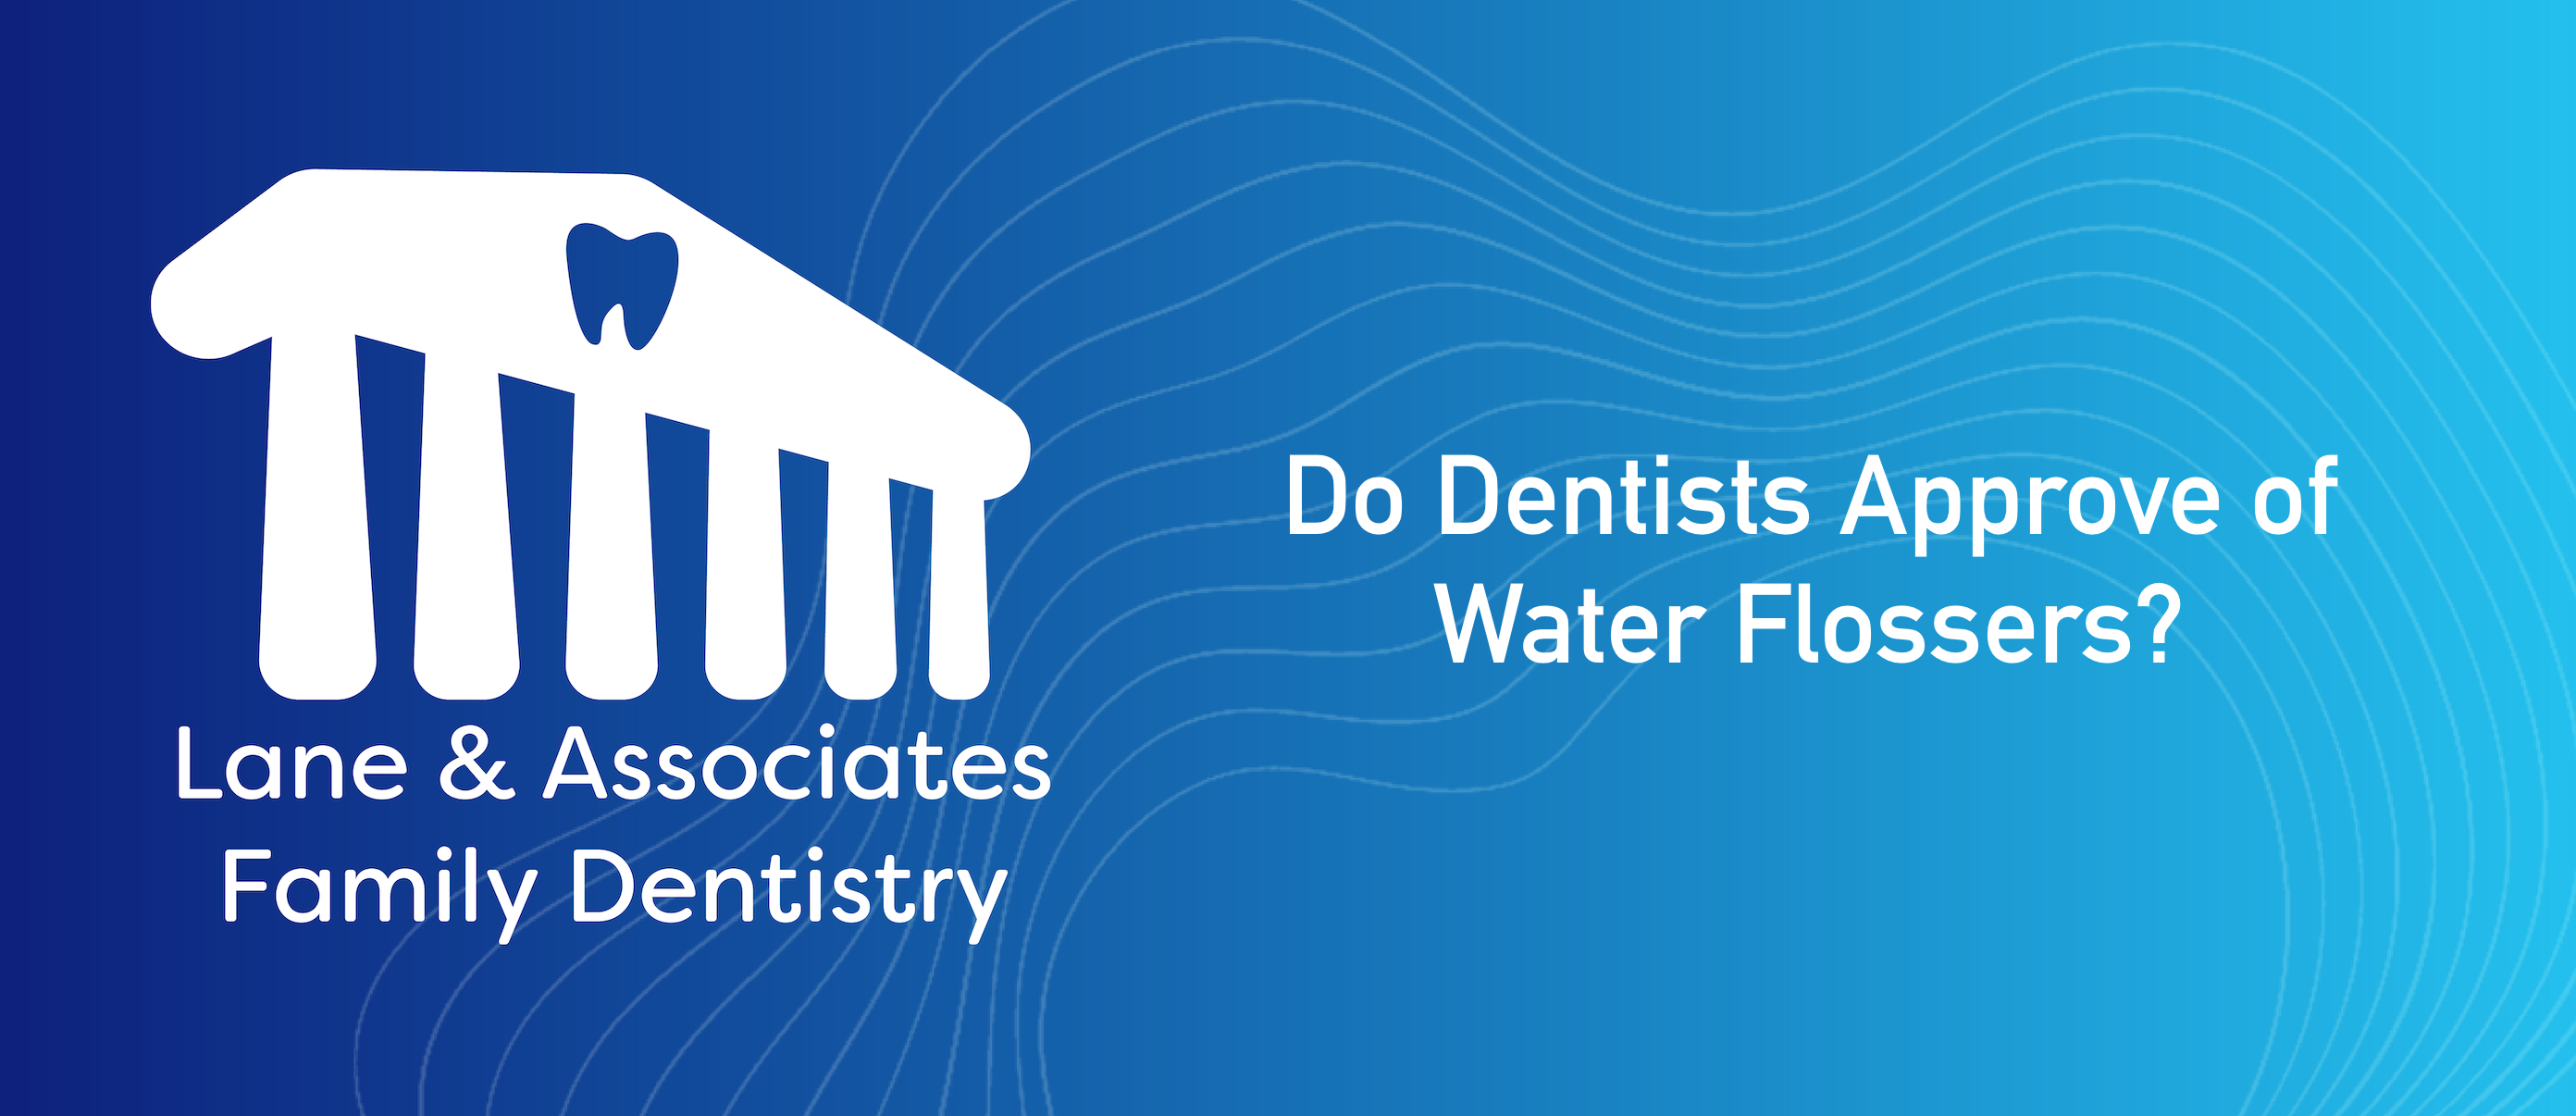 Do Dentists Approve of Water Flossers?